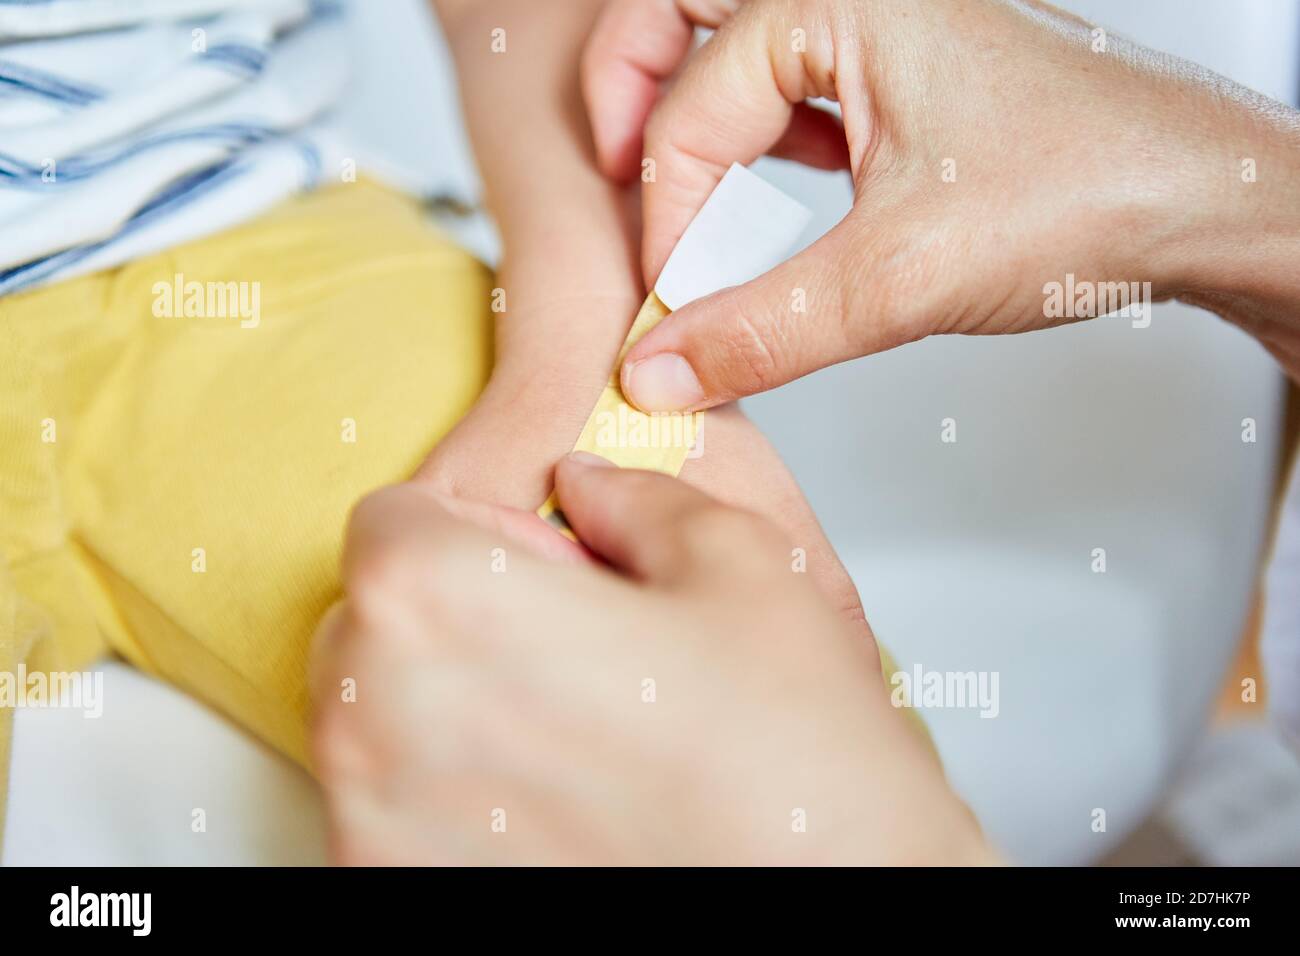 Pediatrician sticks a plaster on the injured hand of child after an accident Stock Photo